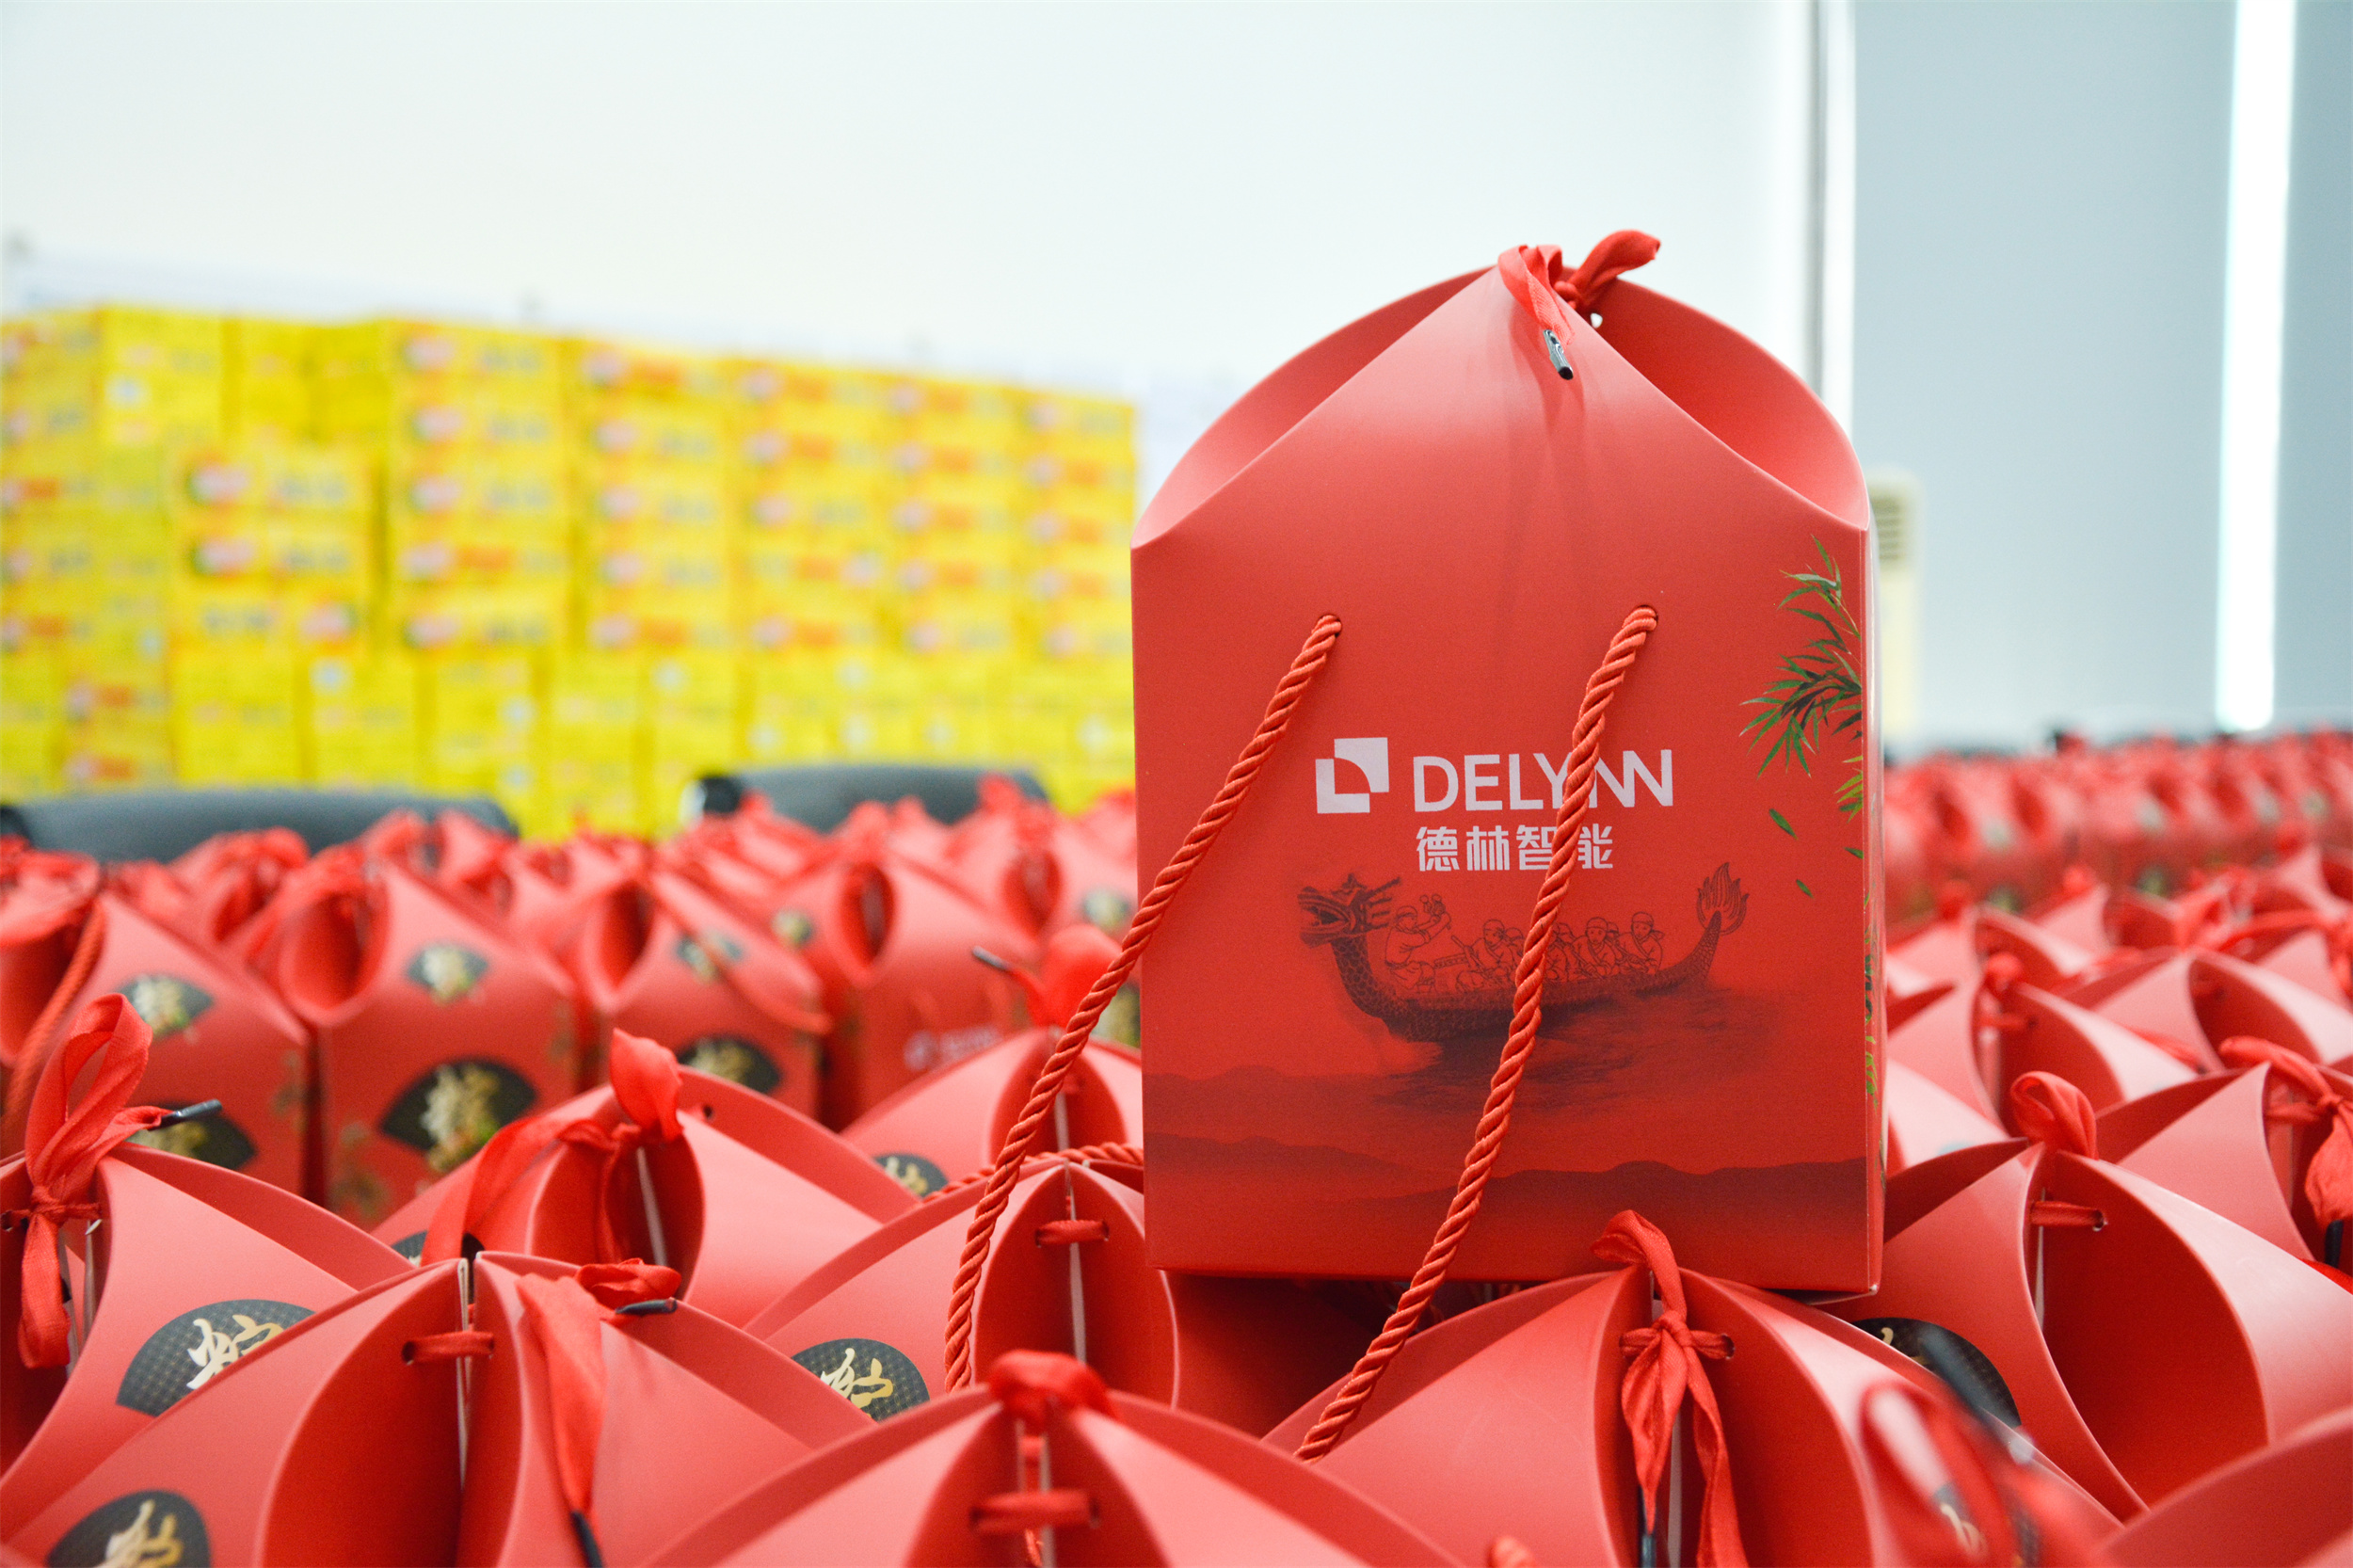 [Delin Information] Delin distributes holiday benefits to employees - Dragon Boat Festival